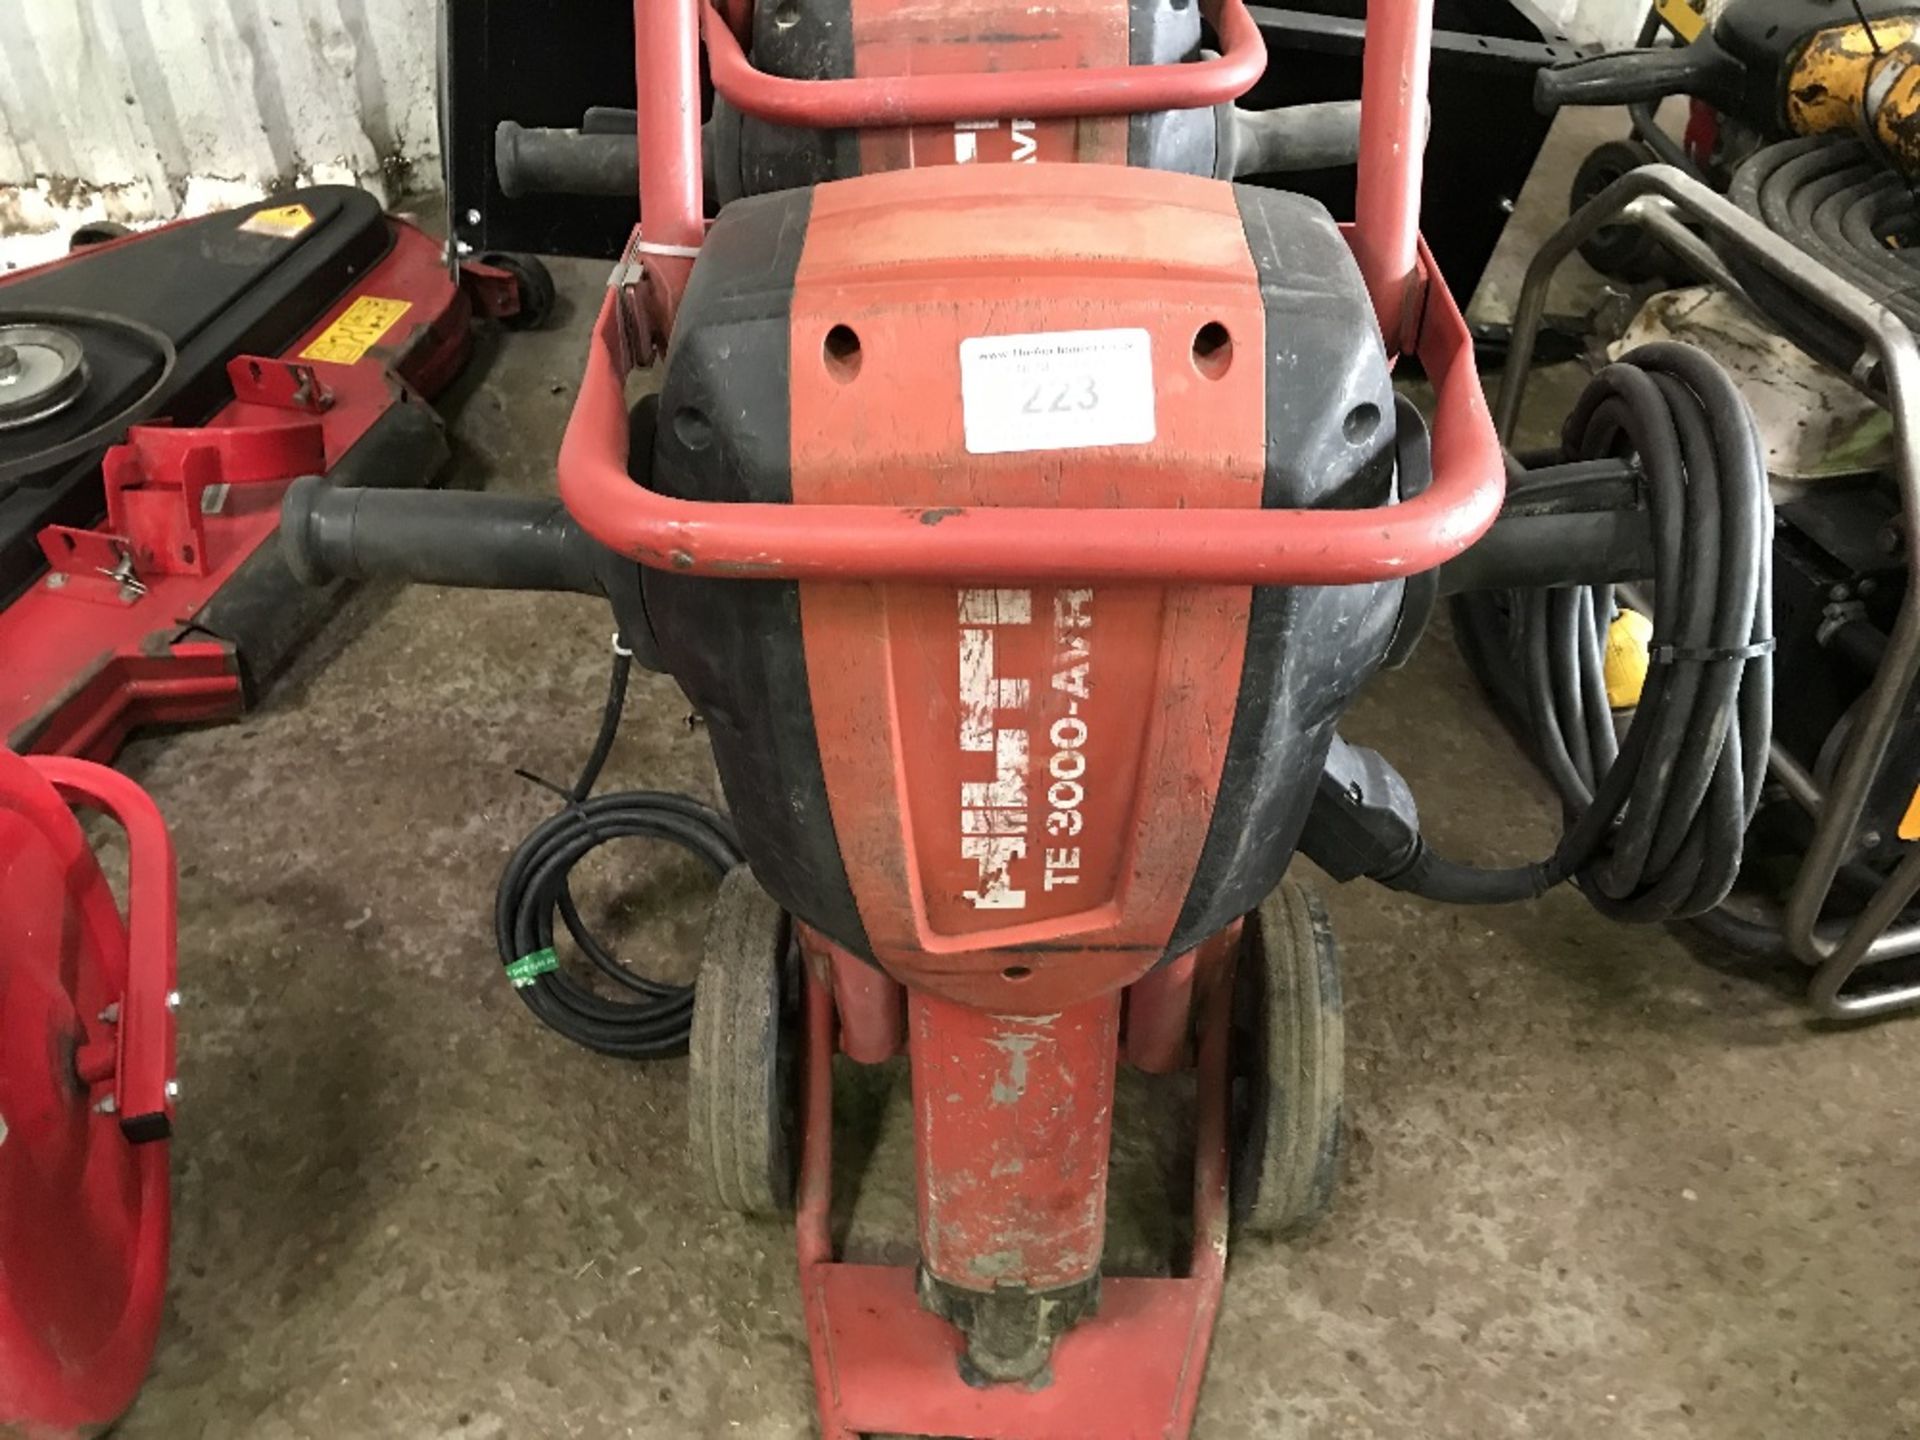 3 X HILTI 3000-AVR HEAVY DUTY UPRIGHT BREAKERS UNTESTED, CONDITION UNKNOWN Sold Under The